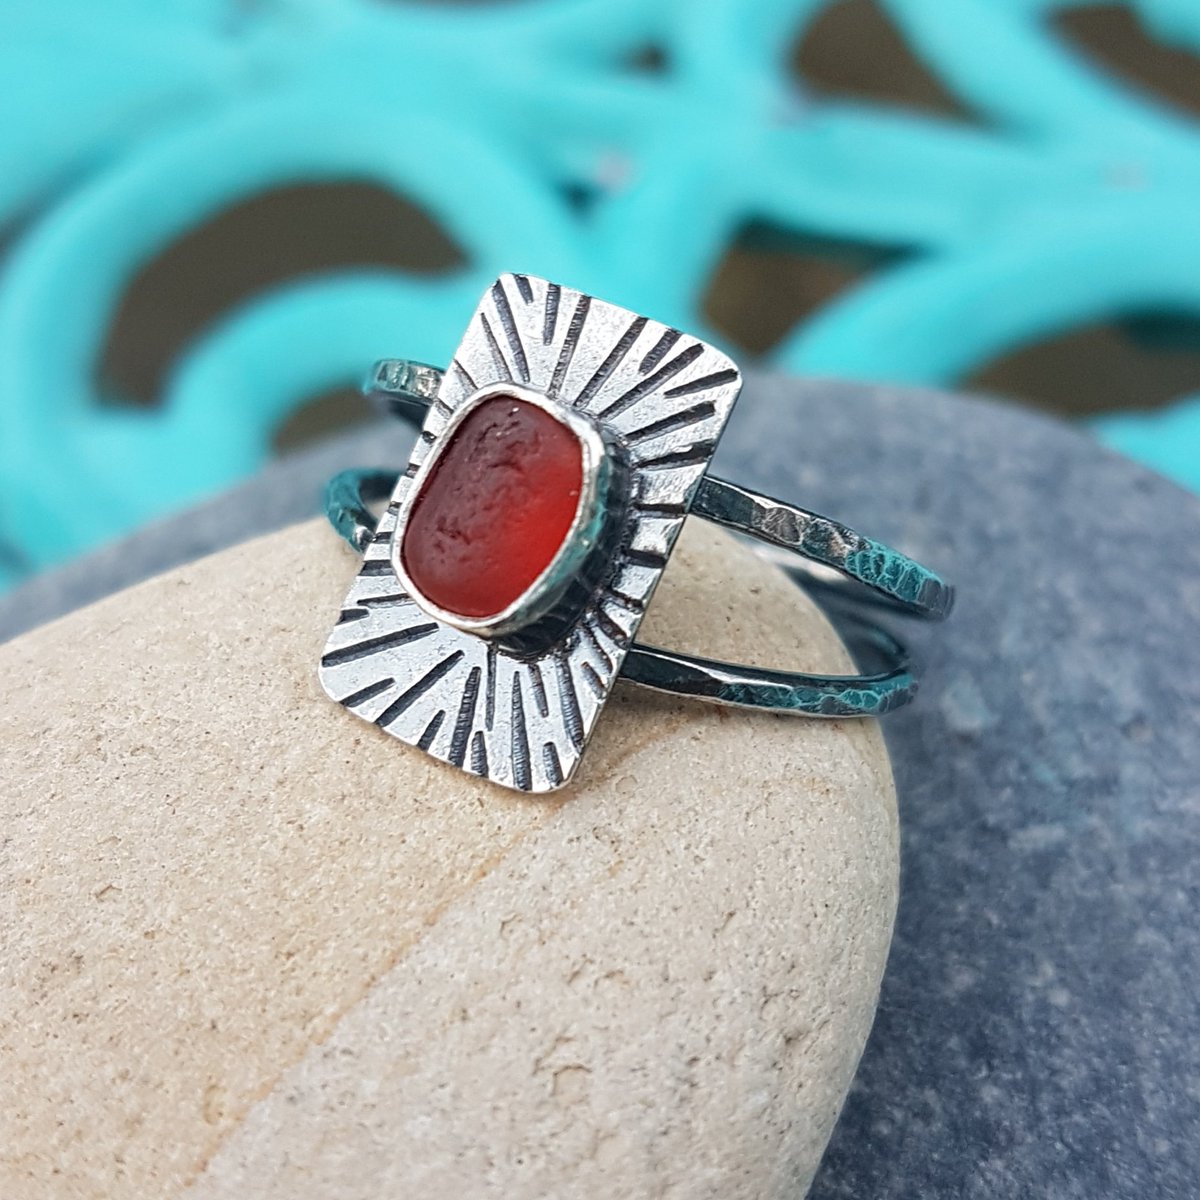 Morning all. Happy Wednesday! Here's a one off sterling silver and rare red seaglass ring, to bring a little heat, light & sass to your life today. 

Shop at ❤ ilovedollyjewellery.co.uk/rings/handmade…

#earlybiz #handmade #handmadehour #CraftBizParty #redseaglass #seaglassring #wednesdaymorning